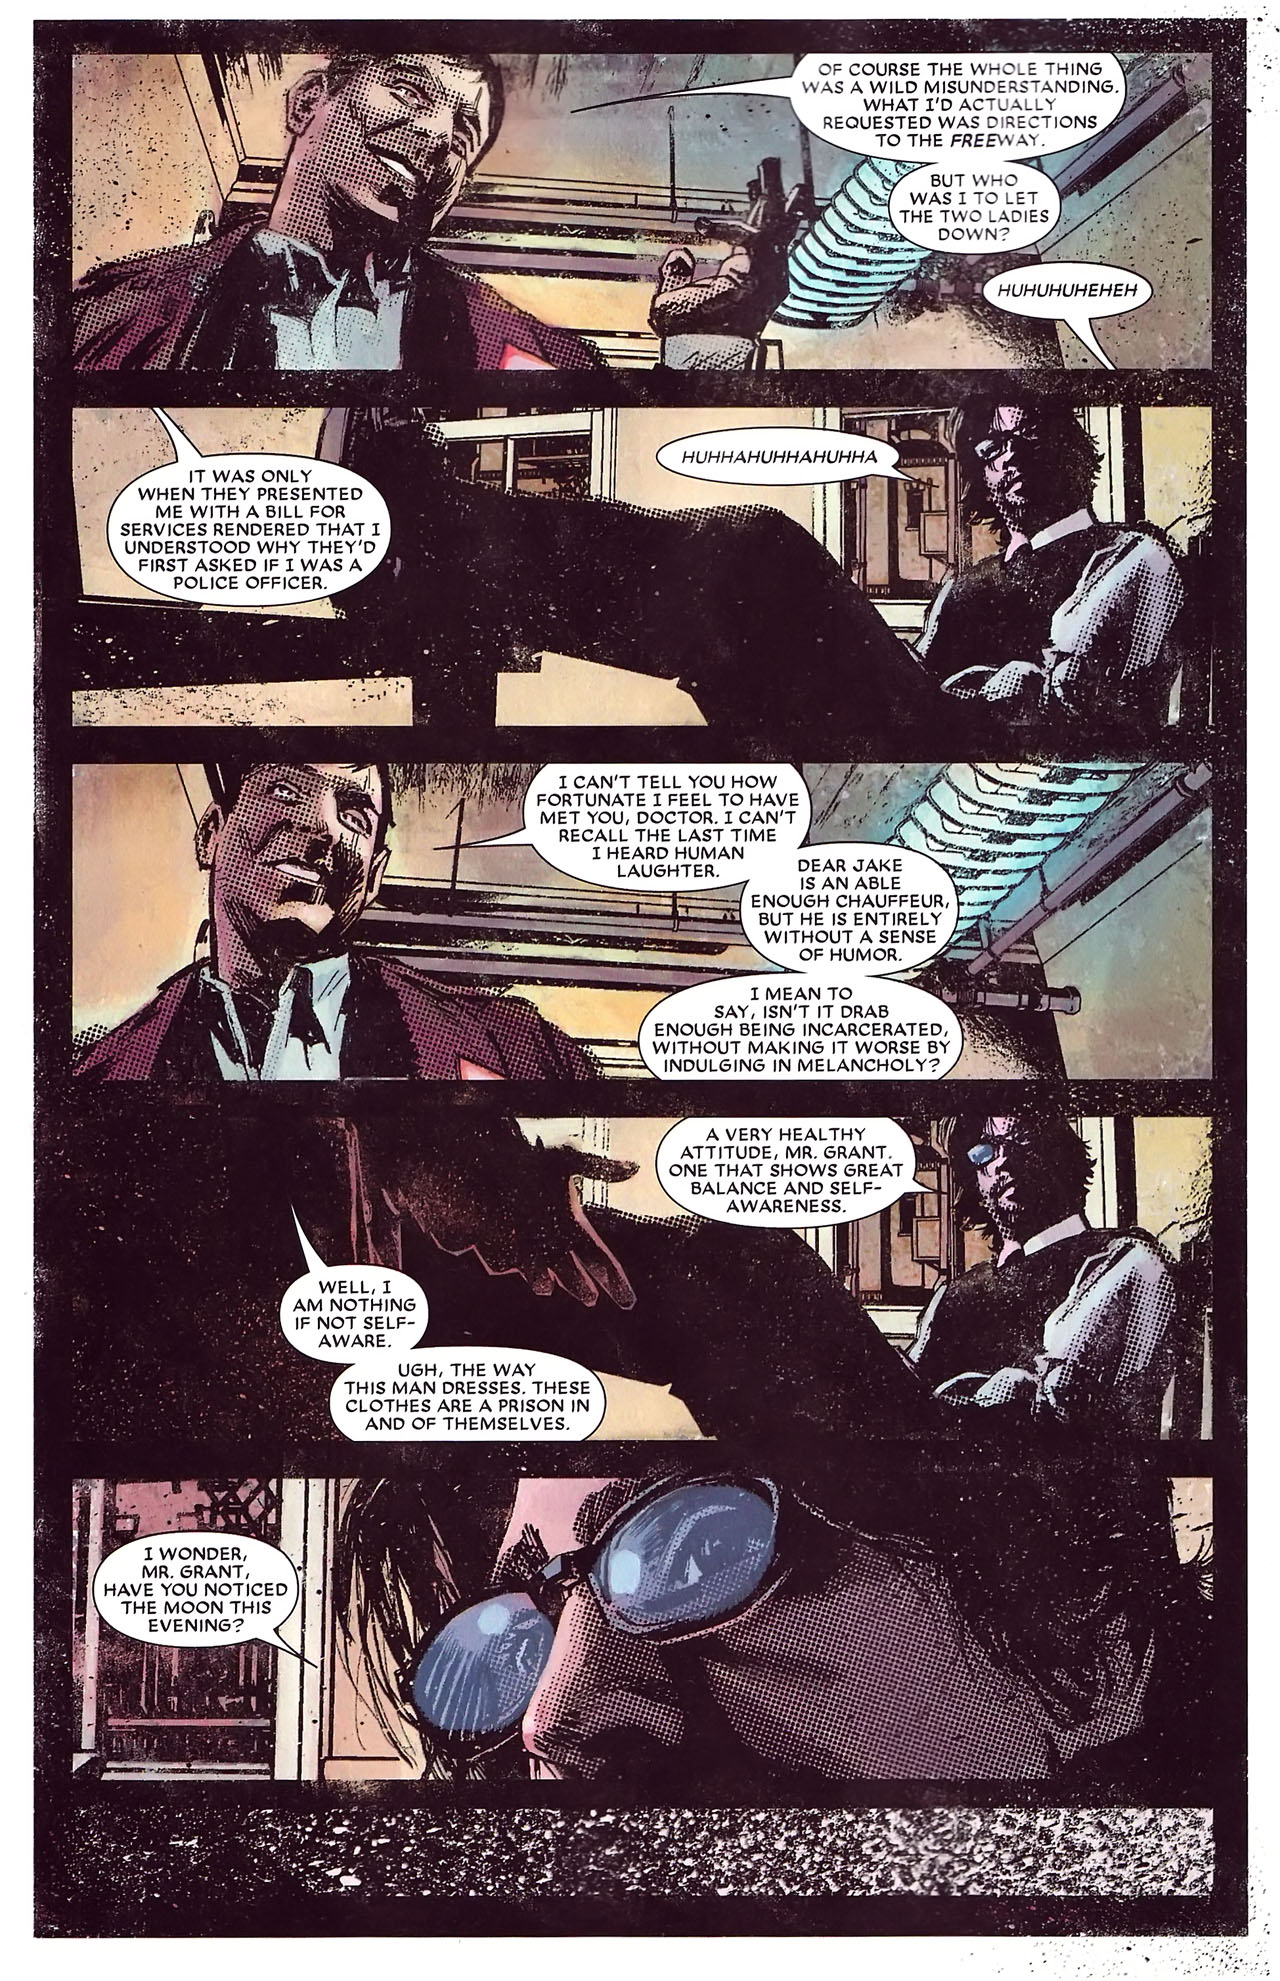 Moon Knight 13 - The Uses of Restraint - 2 of 2